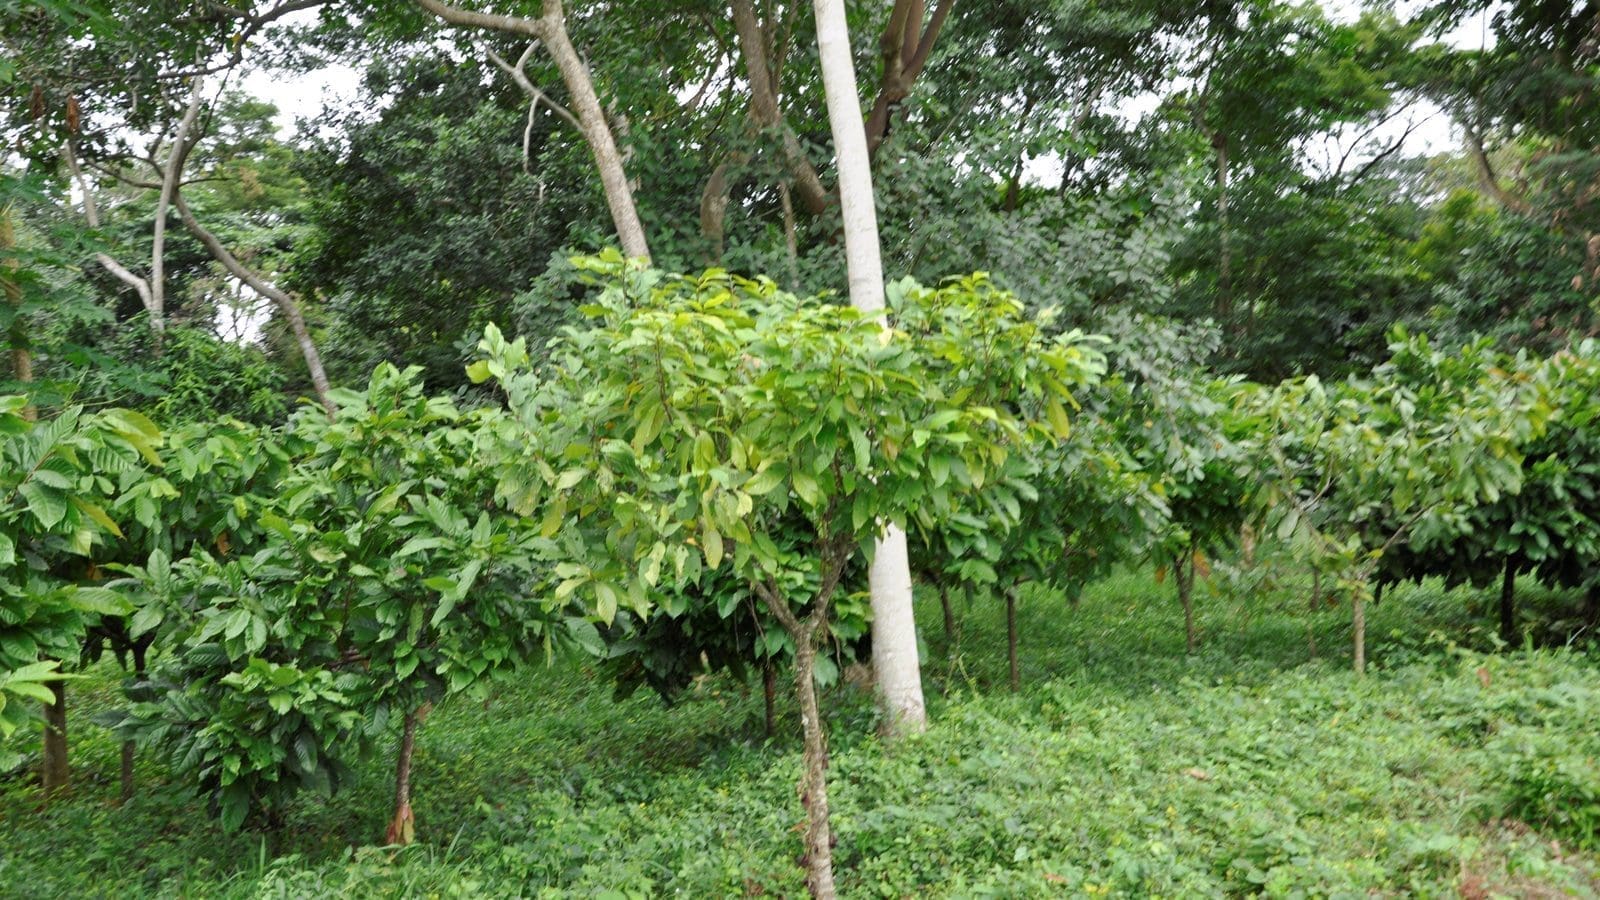 Nestlé partners with Barry Callebaut to intensify agroforestry in cocoa producing country Ivory Coast